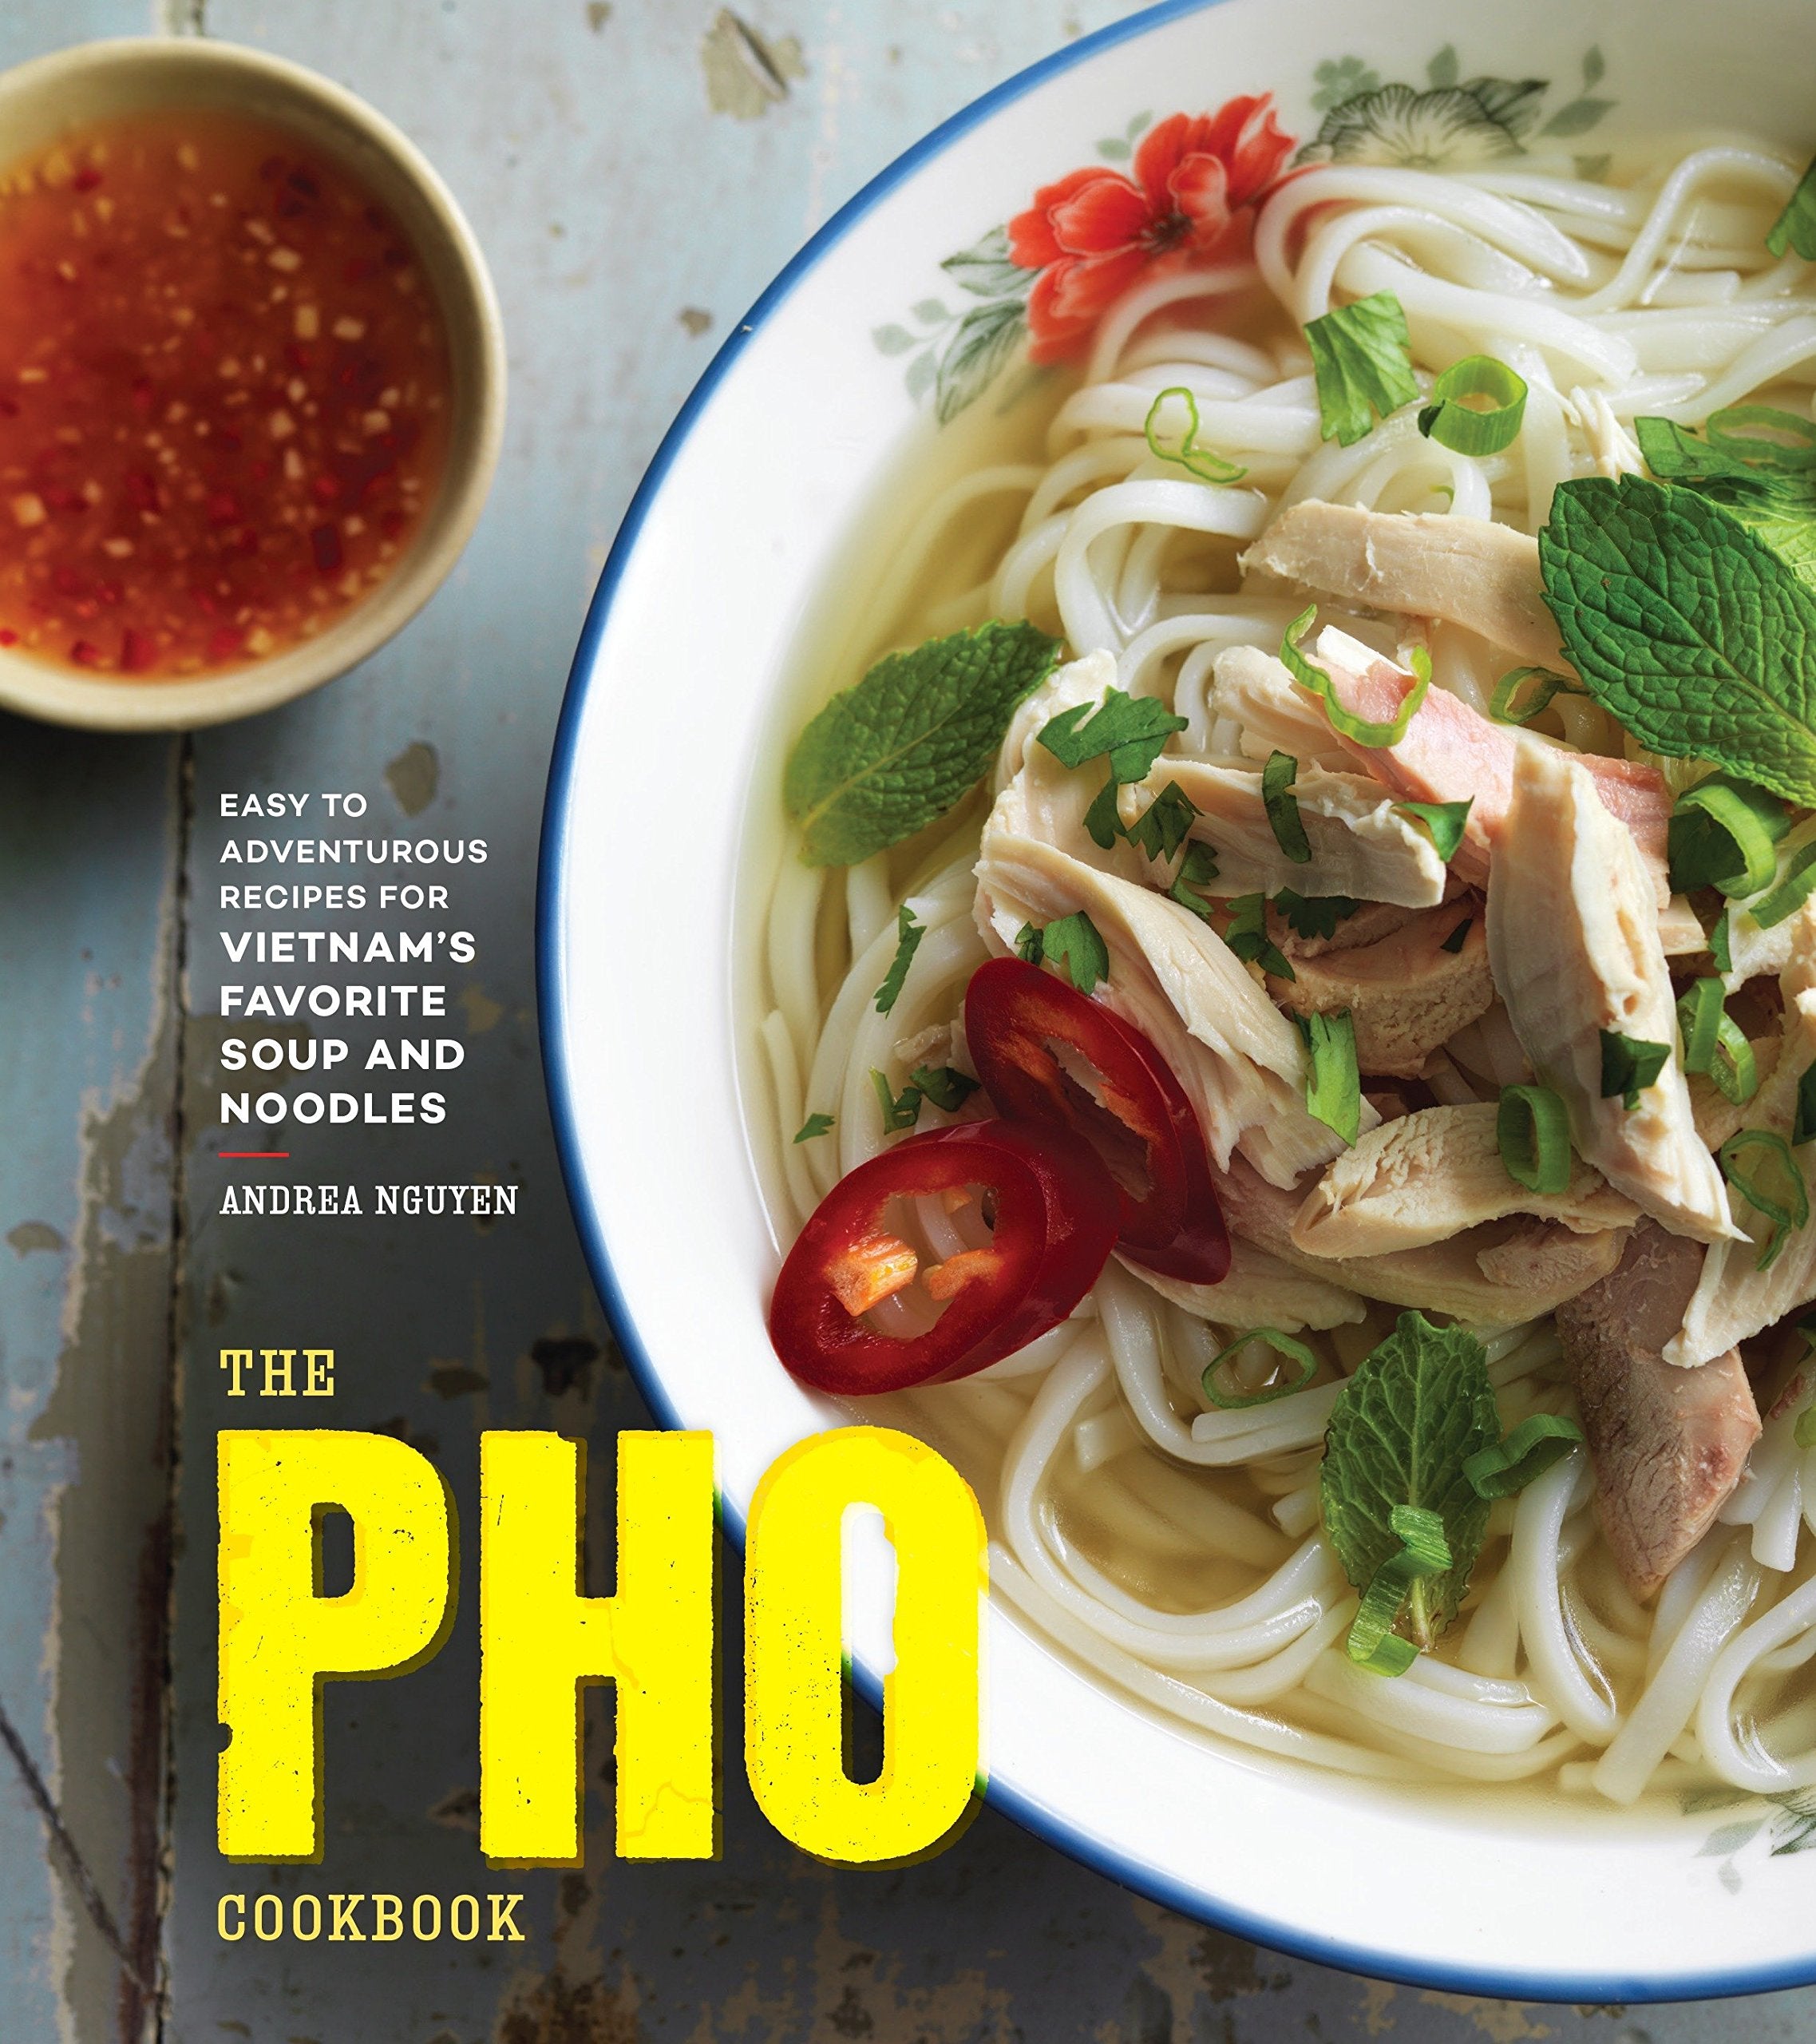 The Pho Cookbook: Easy to Adventurous Recipes for Vietnam's Favorite Soup and Noodles (Andrea Nguyen) *Signed*